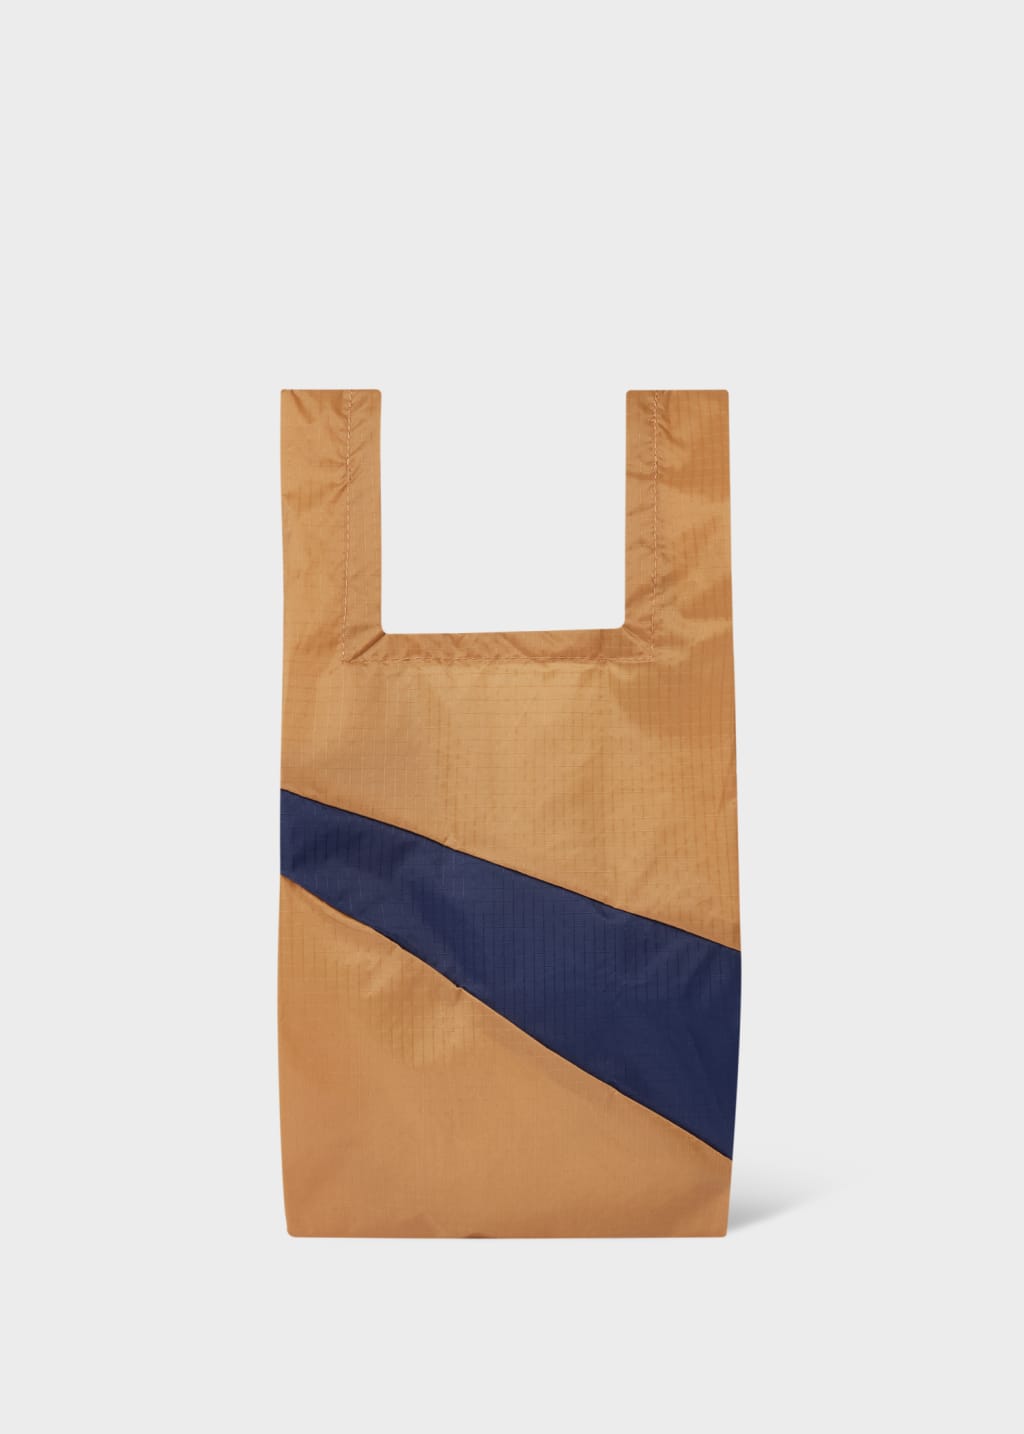 Product View - Camel & Navy'The Shopping Bag' by Susan Bijl - Small